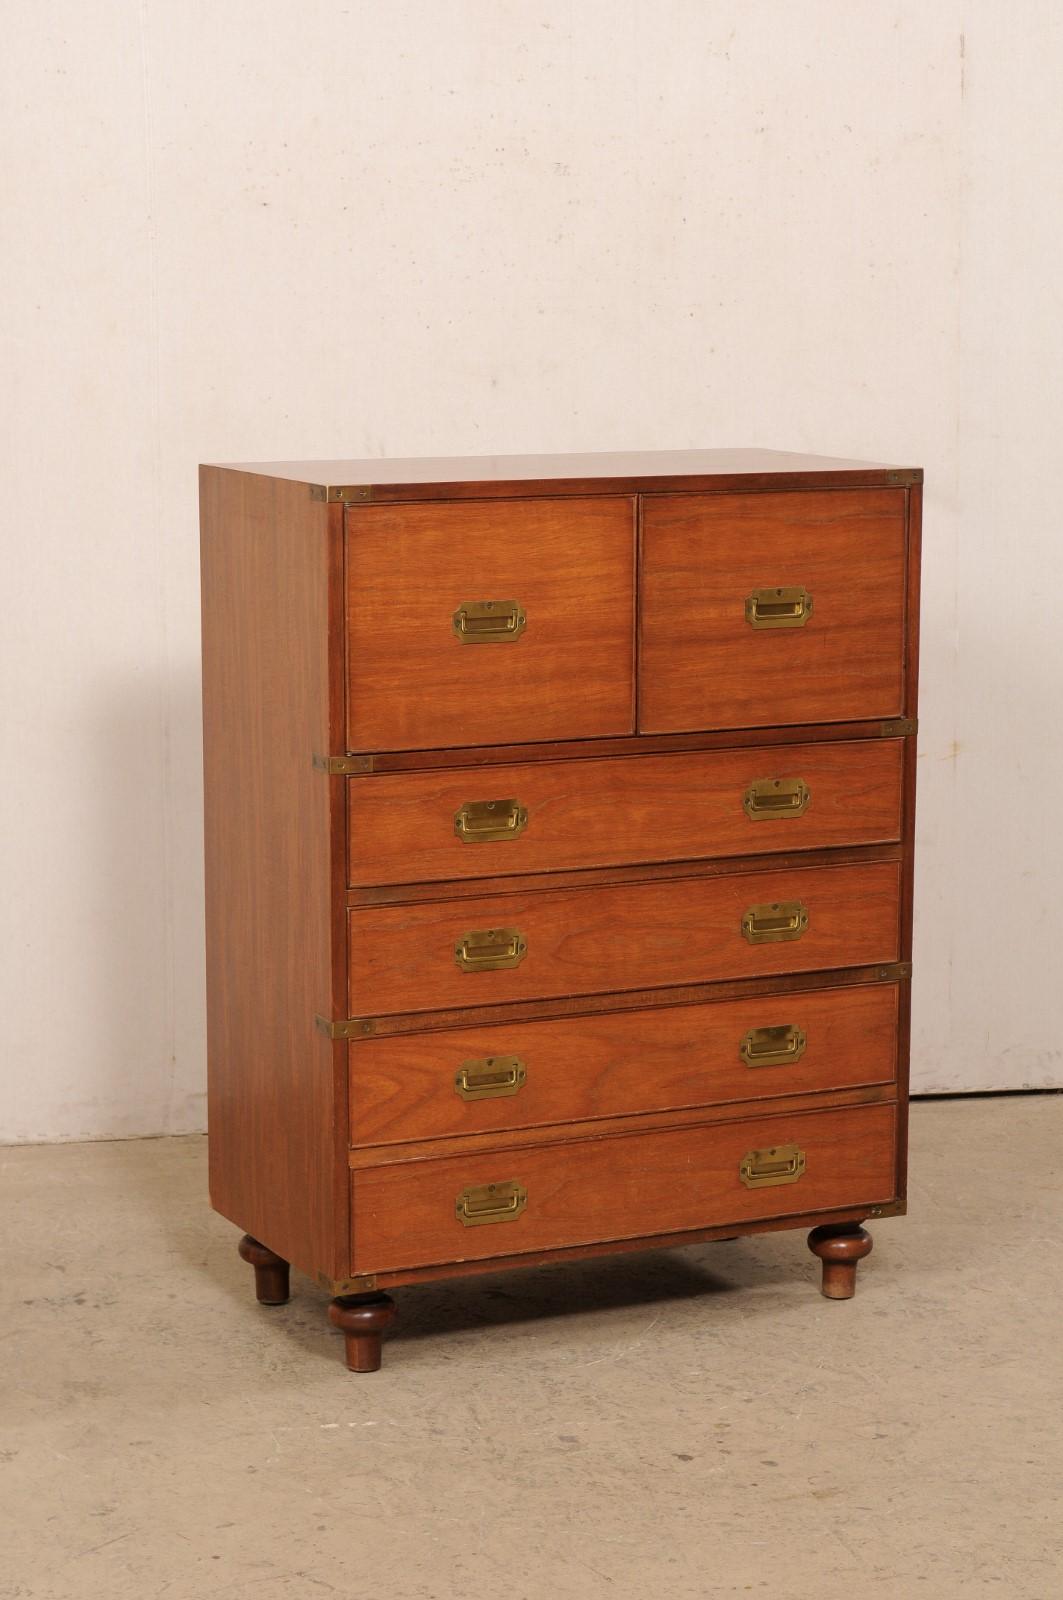 A mahogany wood campaign chest by New England furniture maker Beacon Hill Collection (labeled as piece #311) from the mid 20th century. This mahogany storage piece stands approximately four feet tall and features a cleanly designed case fitted with